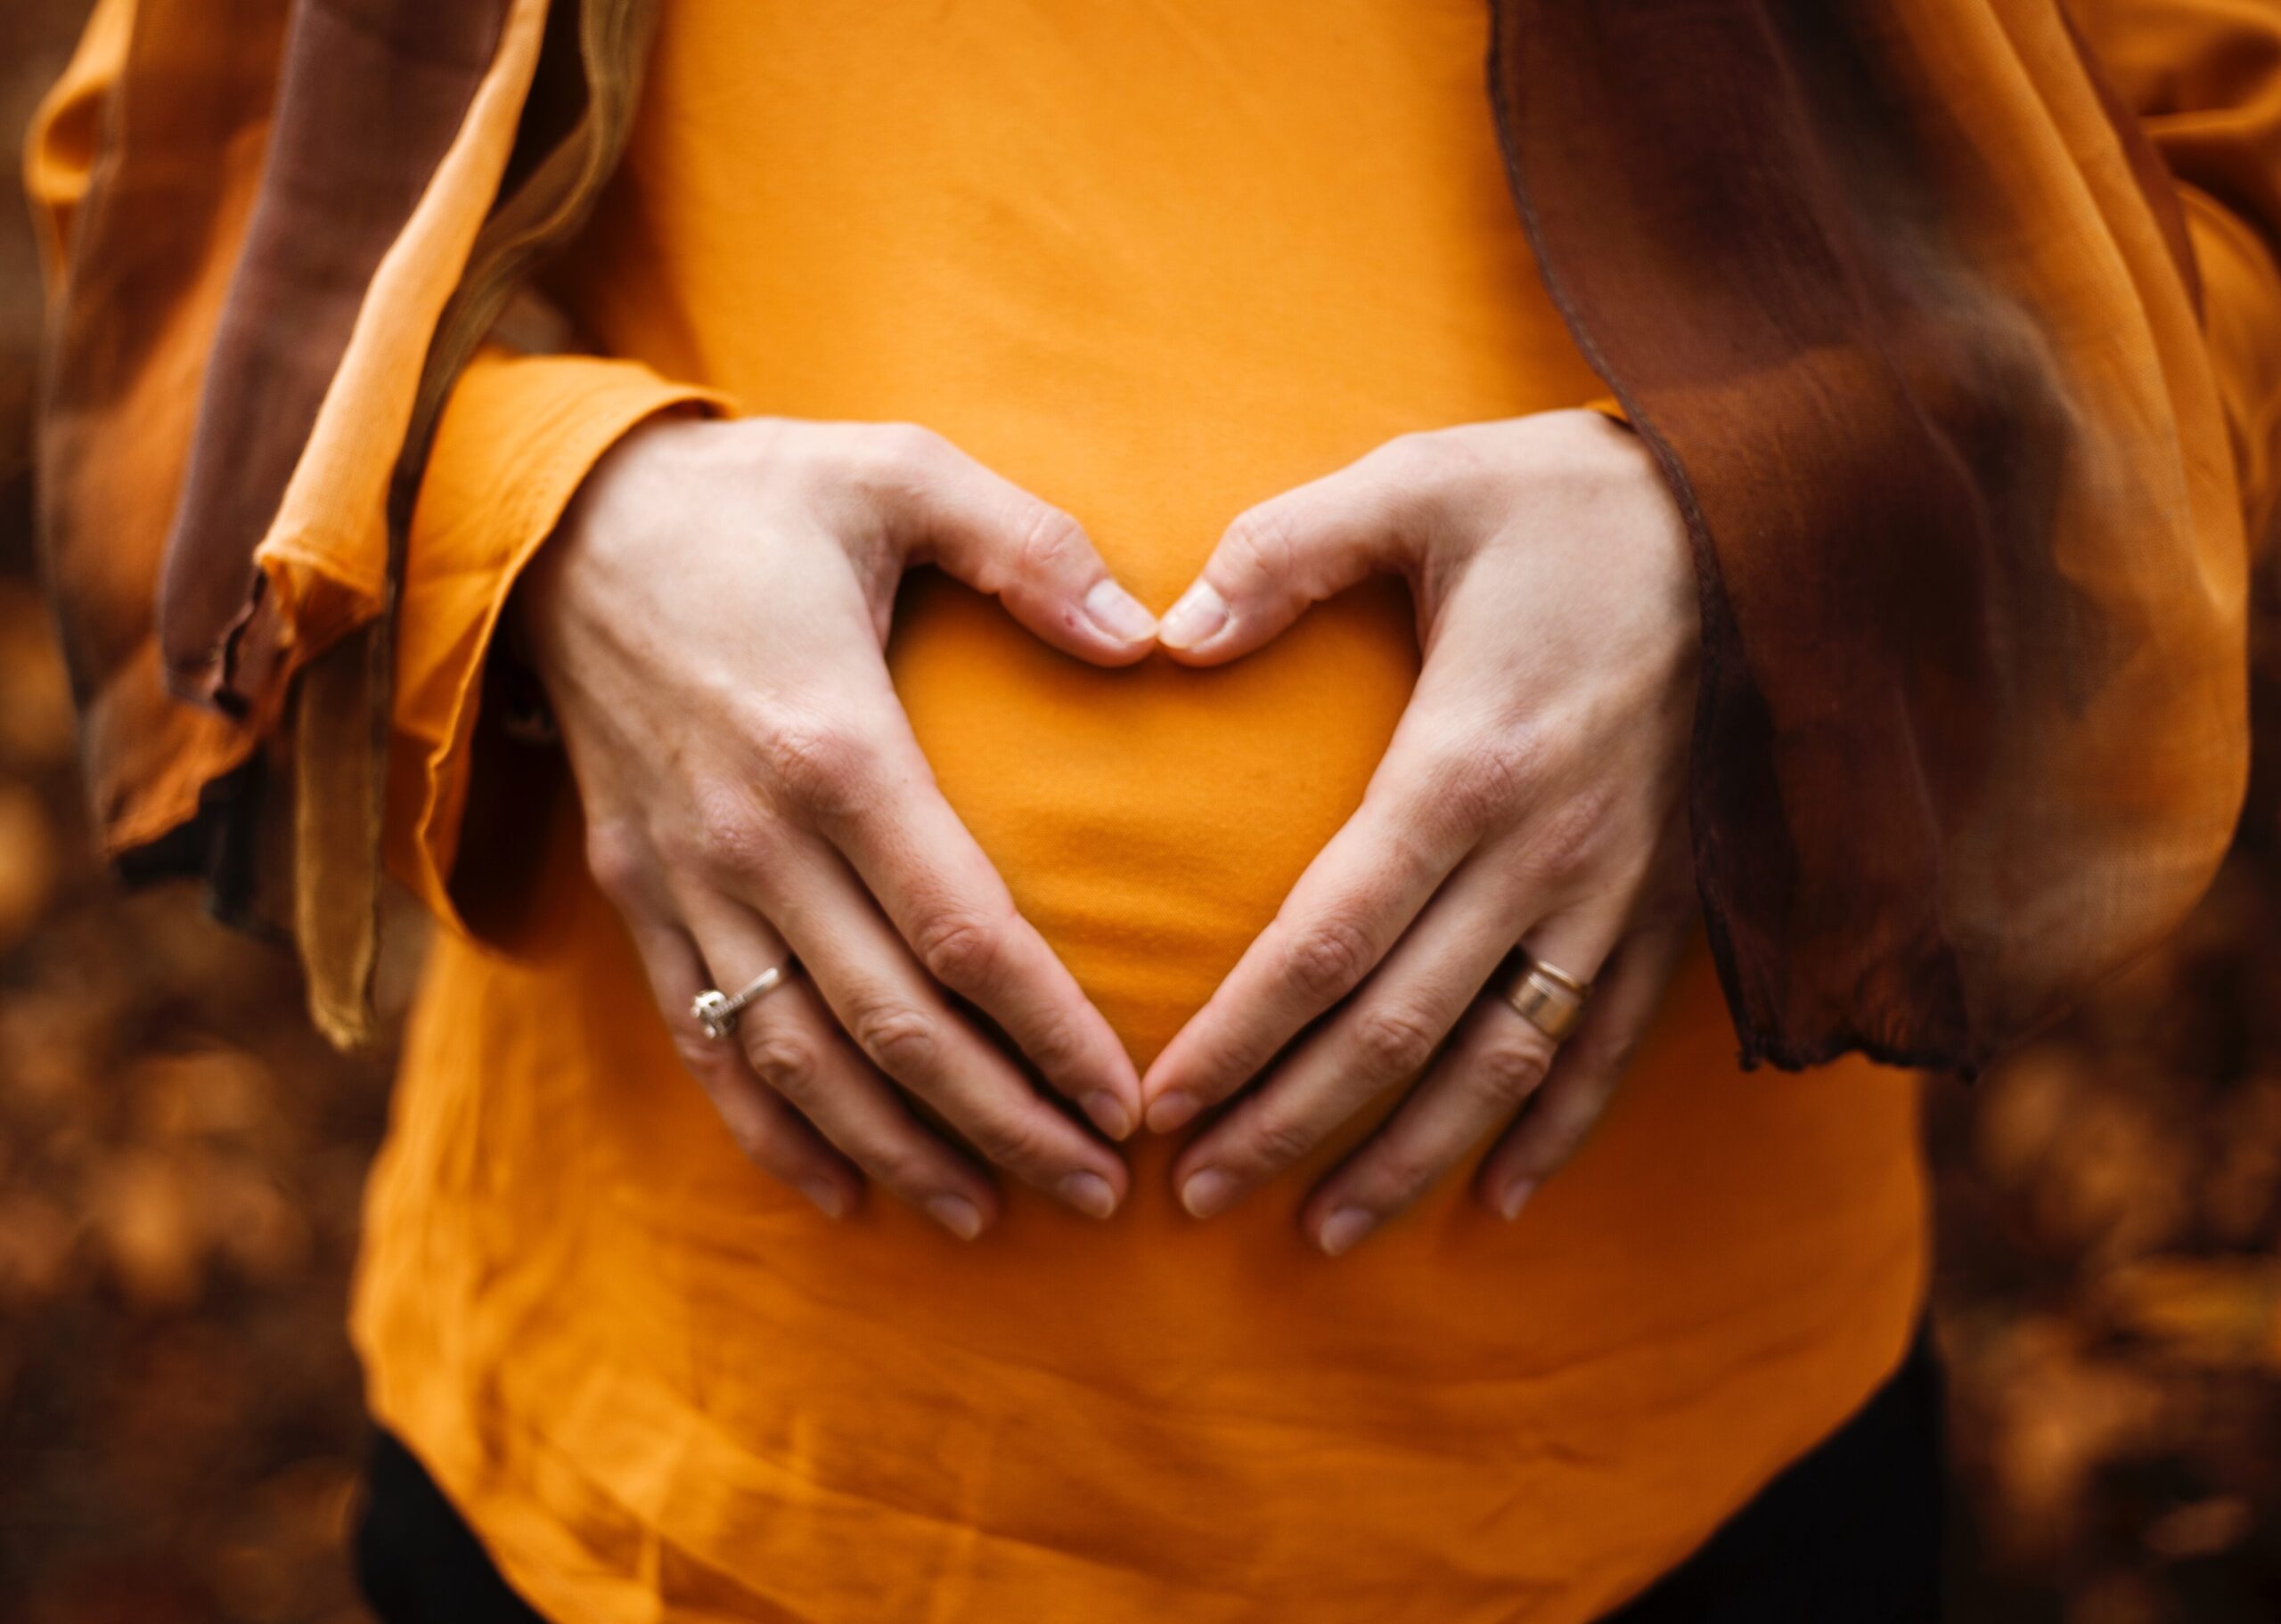 Pregnant woman making a heart over her belly